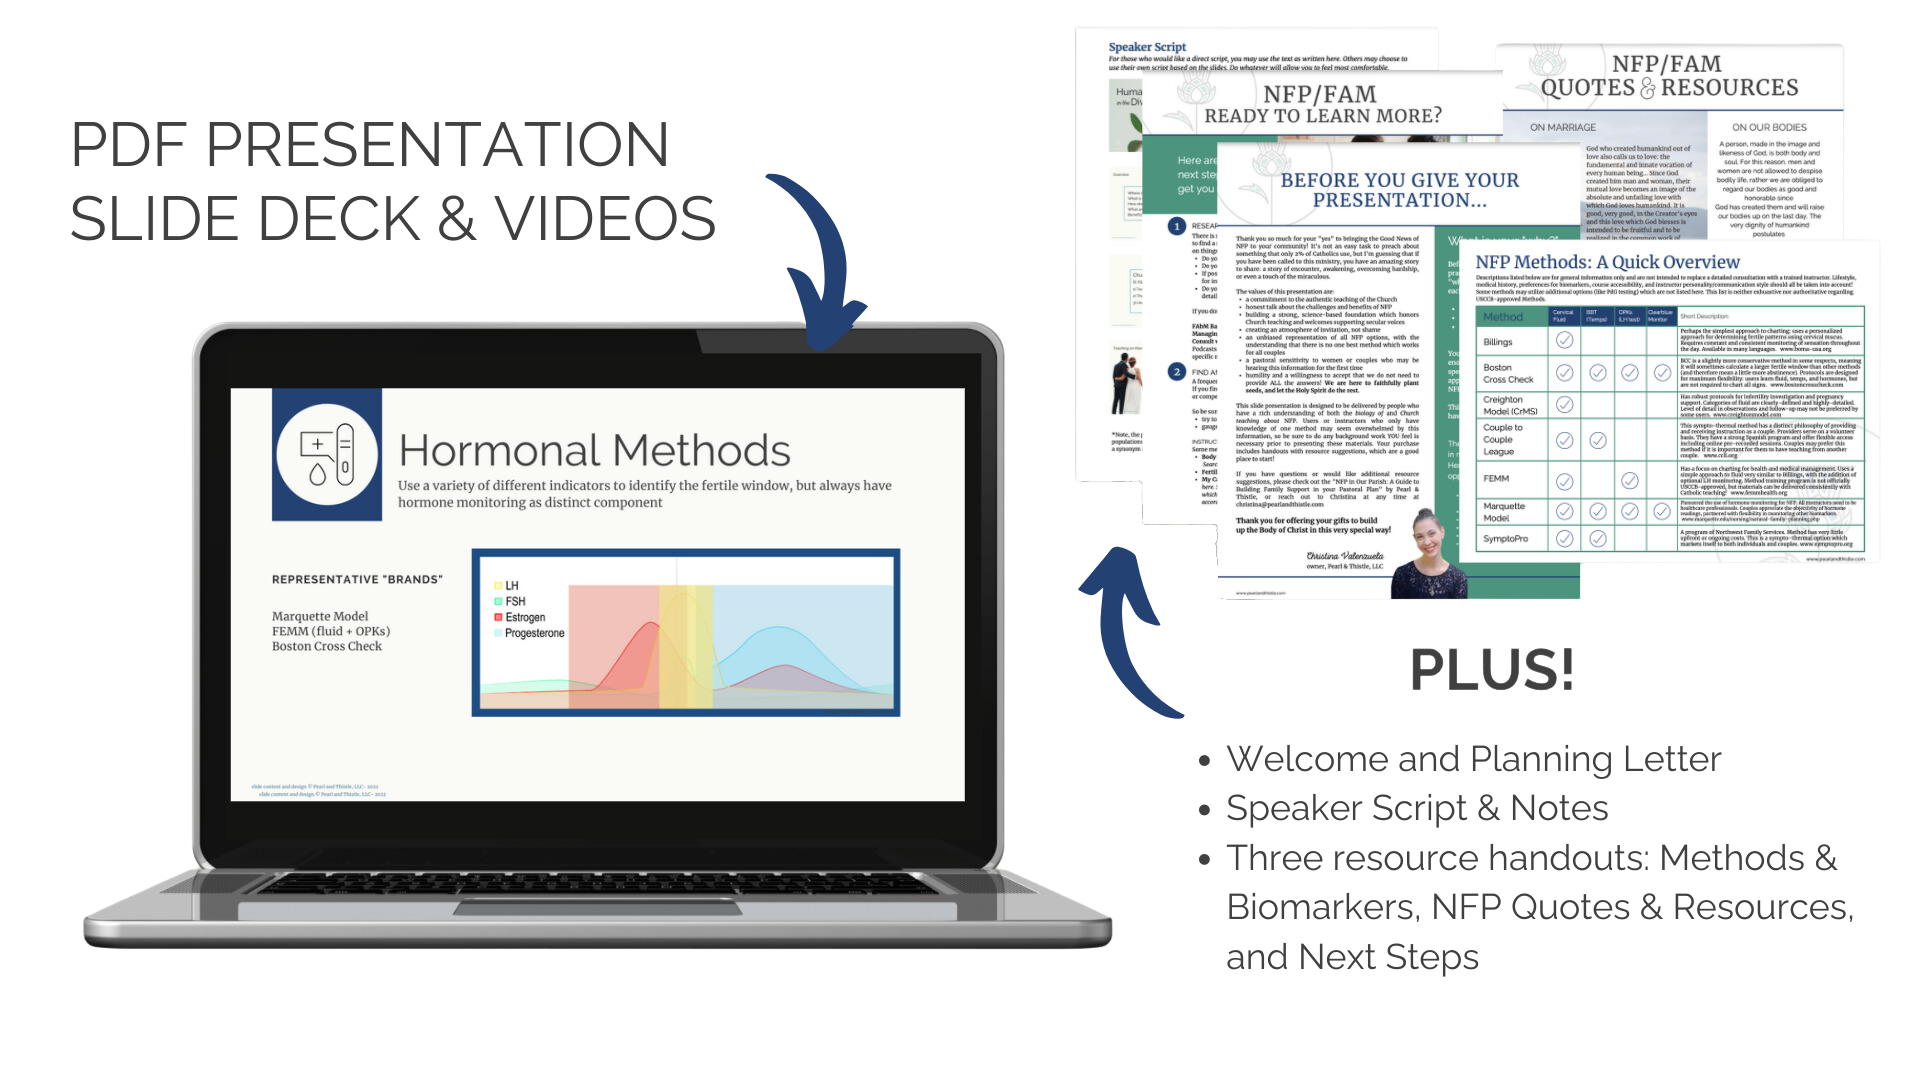 Features laptop with sample presentation slide and five handouts. The words "PDF Presentation Slide Deck & Videos Plus! Welcome and Planning Letter, Speaker Script & Notes, Three resource handouts, Method & Biomarkers, NFP Quotes & Resources, and Next Steps" appear.